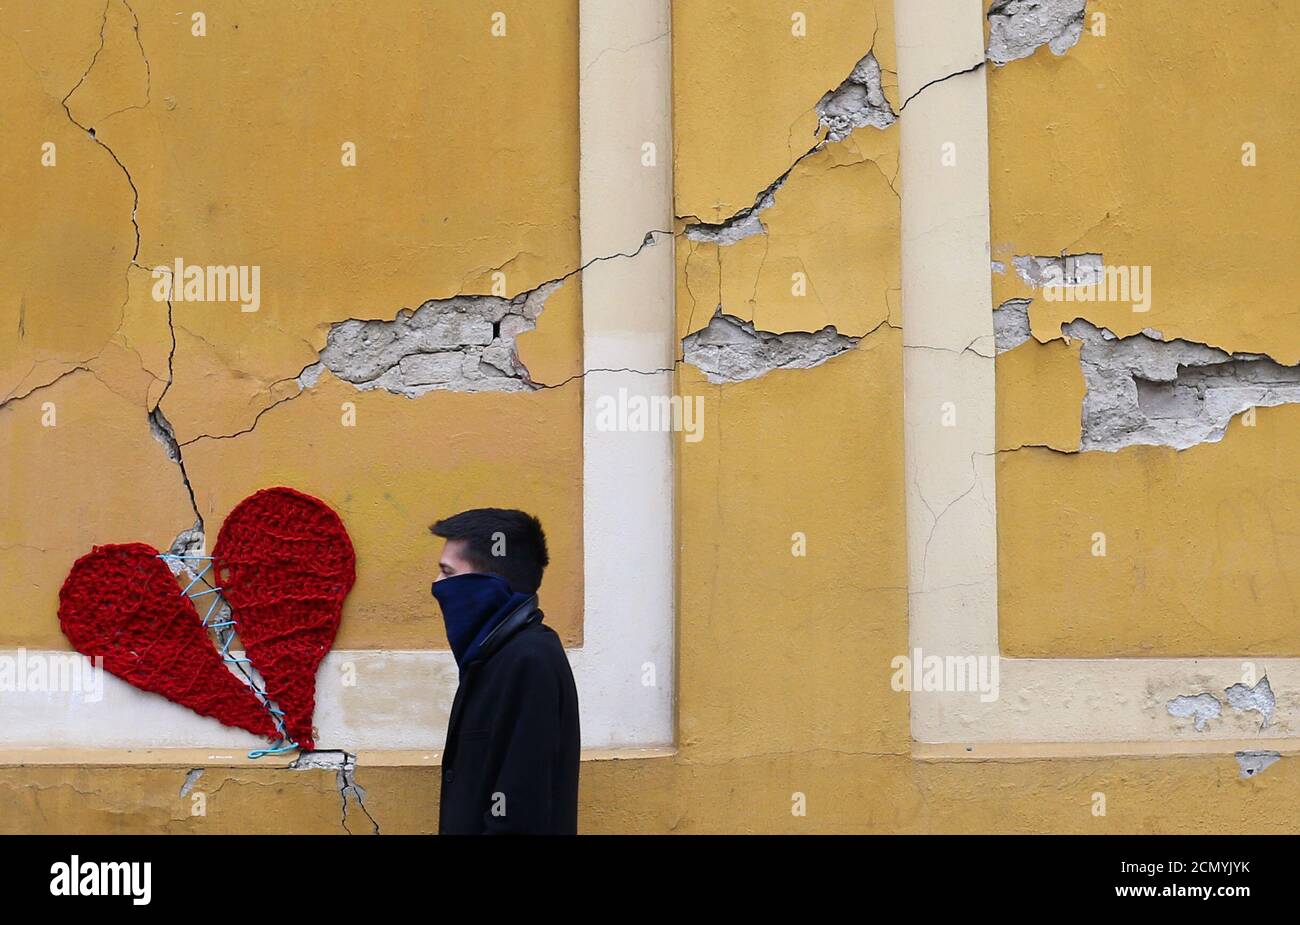 A man walks next to a repaired heart made of wool by Croatian designer Ivona, put on a building in downtown Zagreb, Croatia, March 25, 2020, as the country is fighting